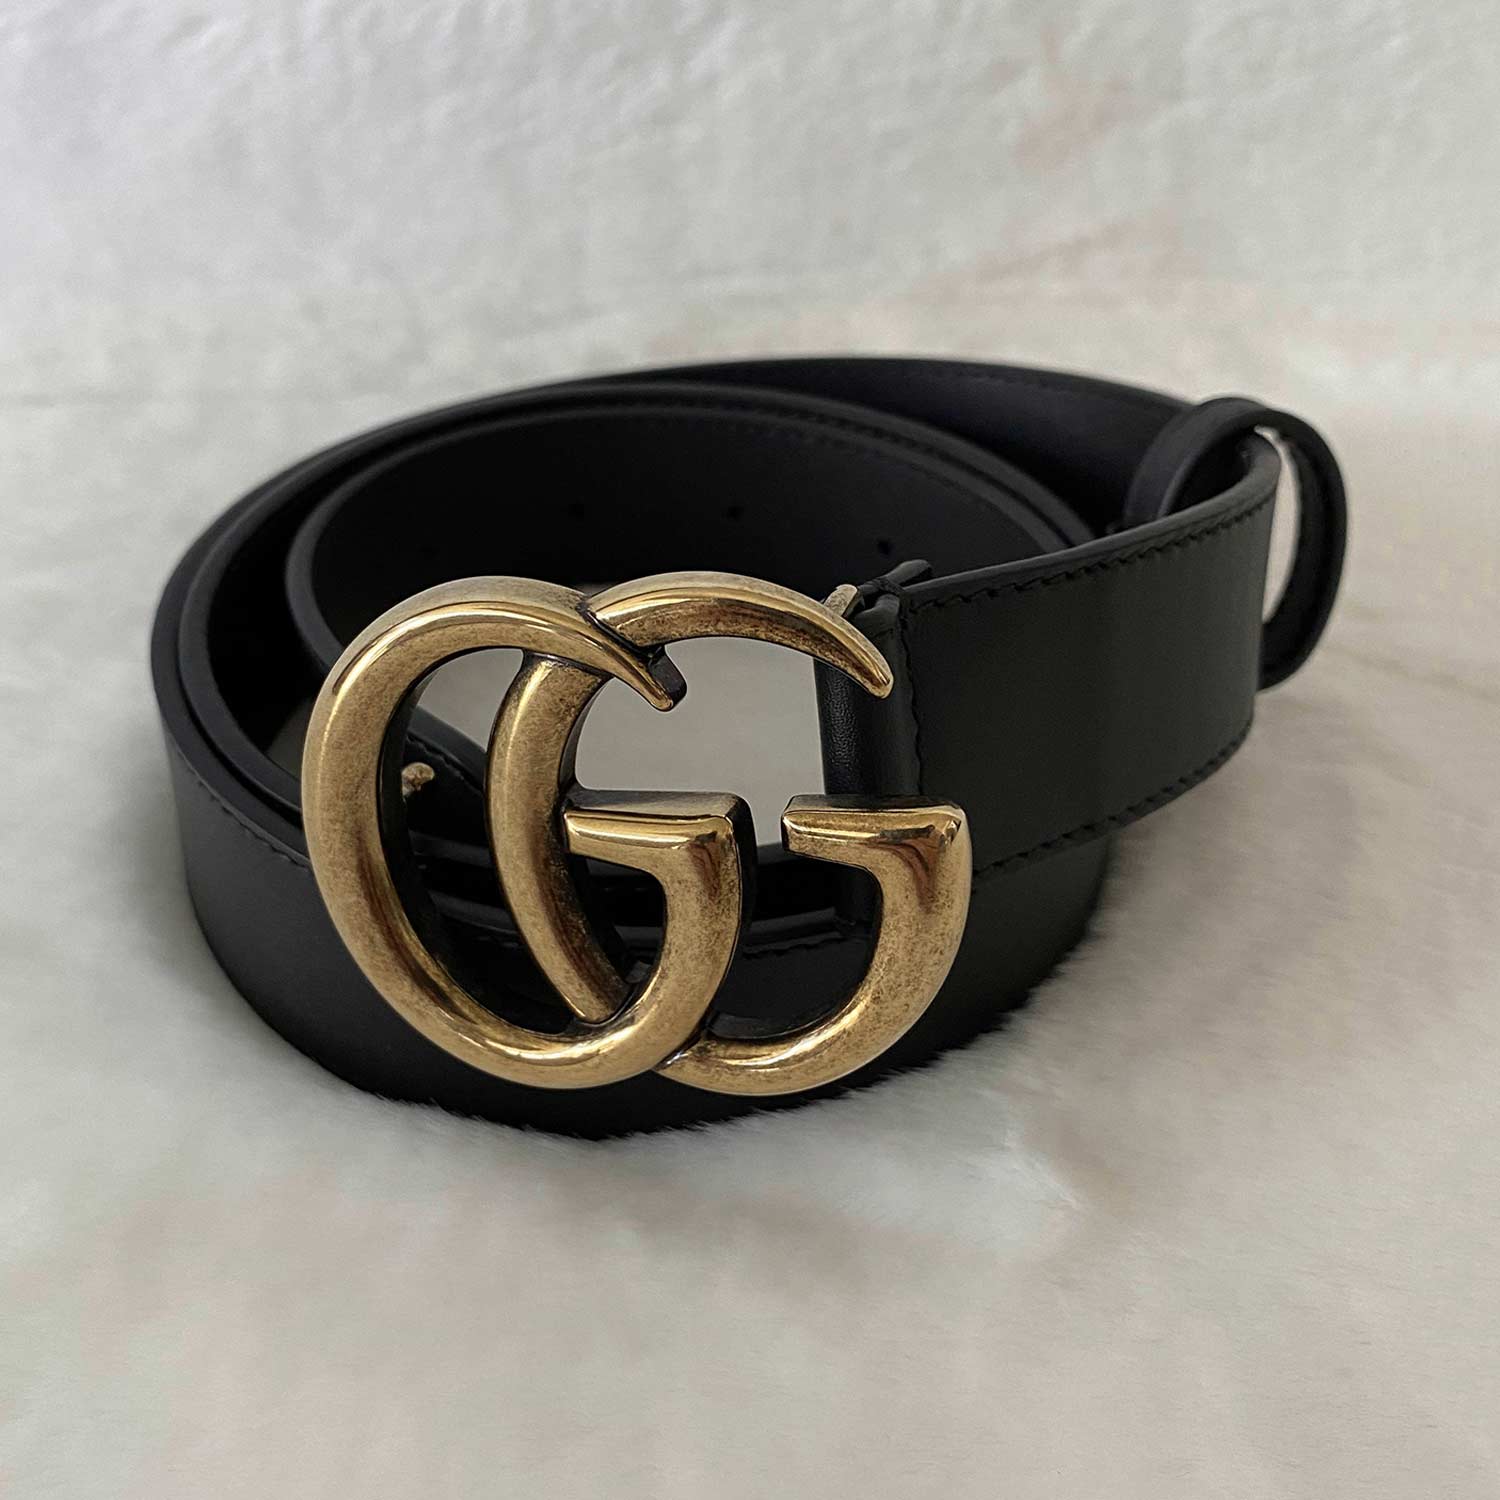 Shop authentic Gucci GG Marmont Leather Belt at revogue for just USD 400.00